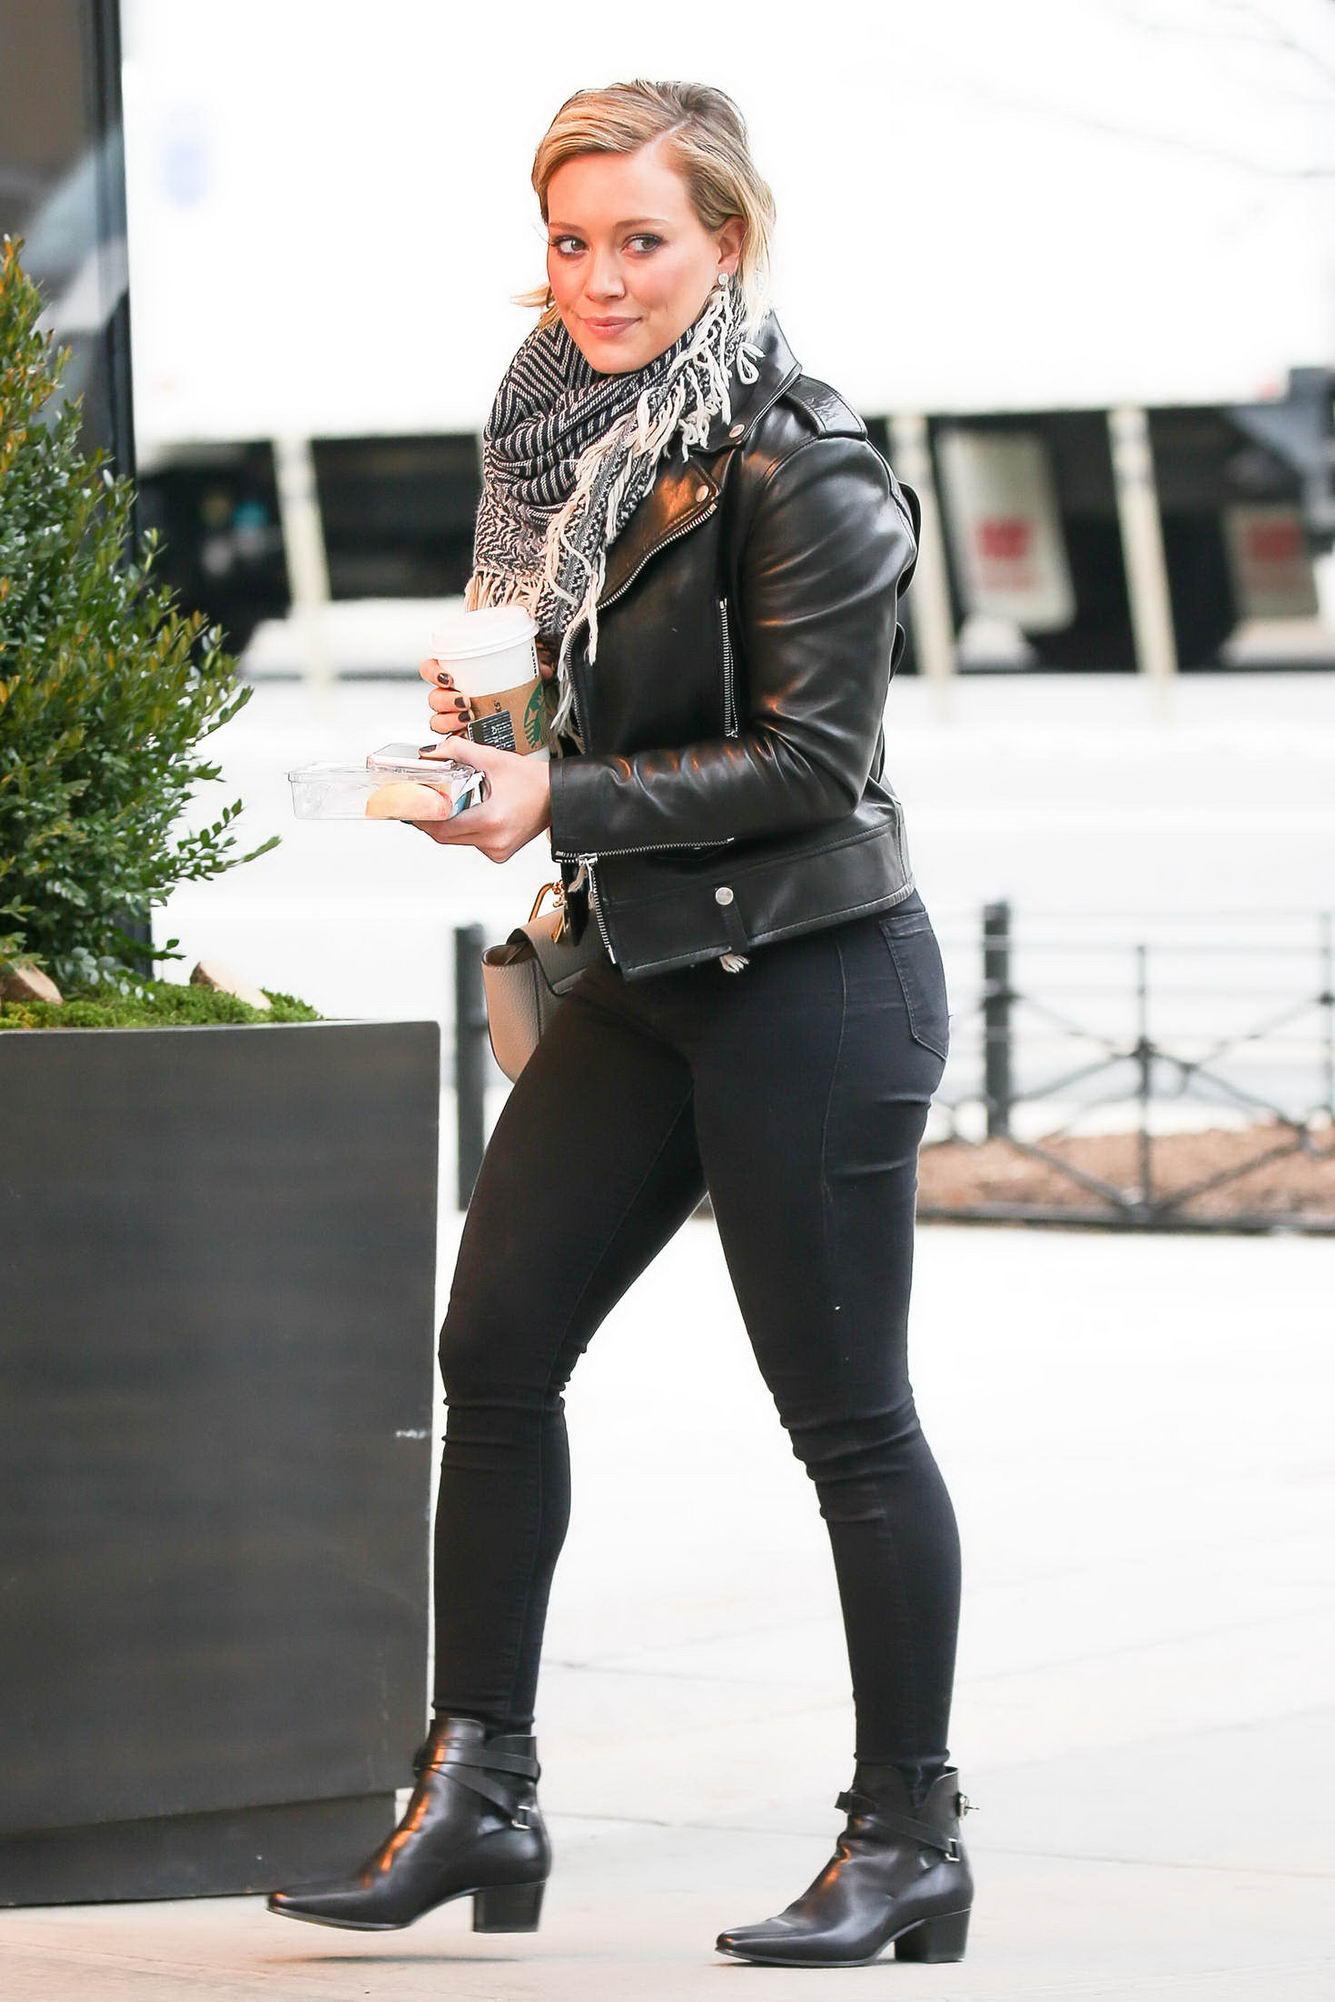 Hilary Duff at her Hotel in NYC